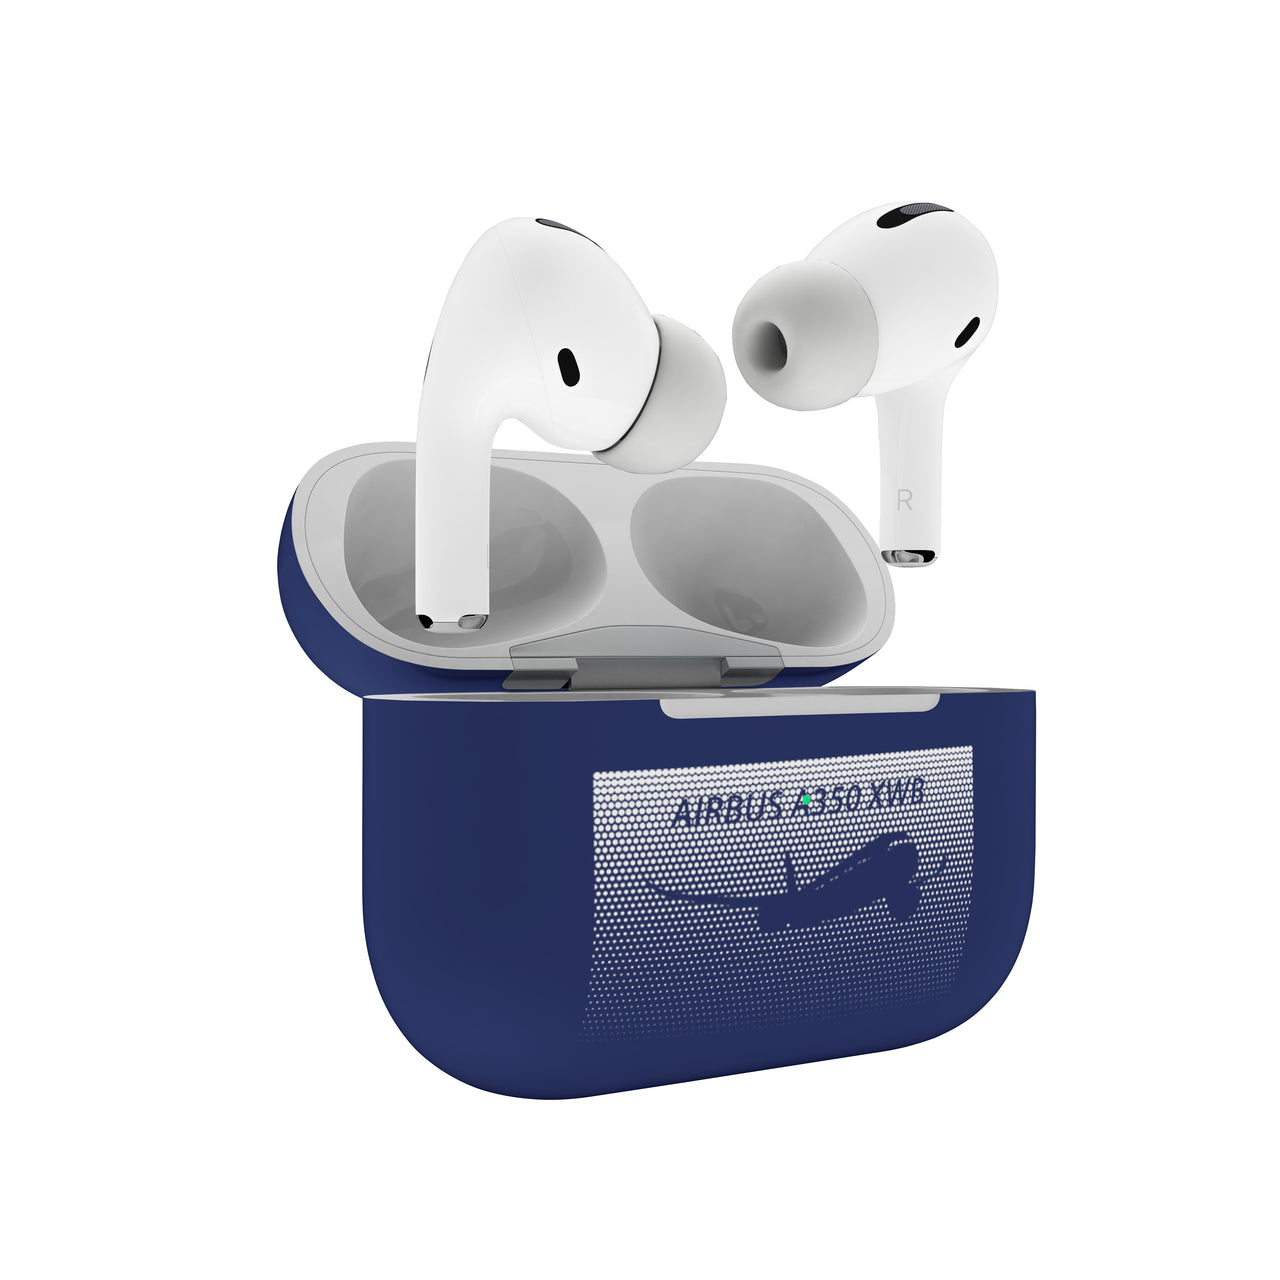 Airbus A350XWB & Dots Designed AirPods "Pro" Cases